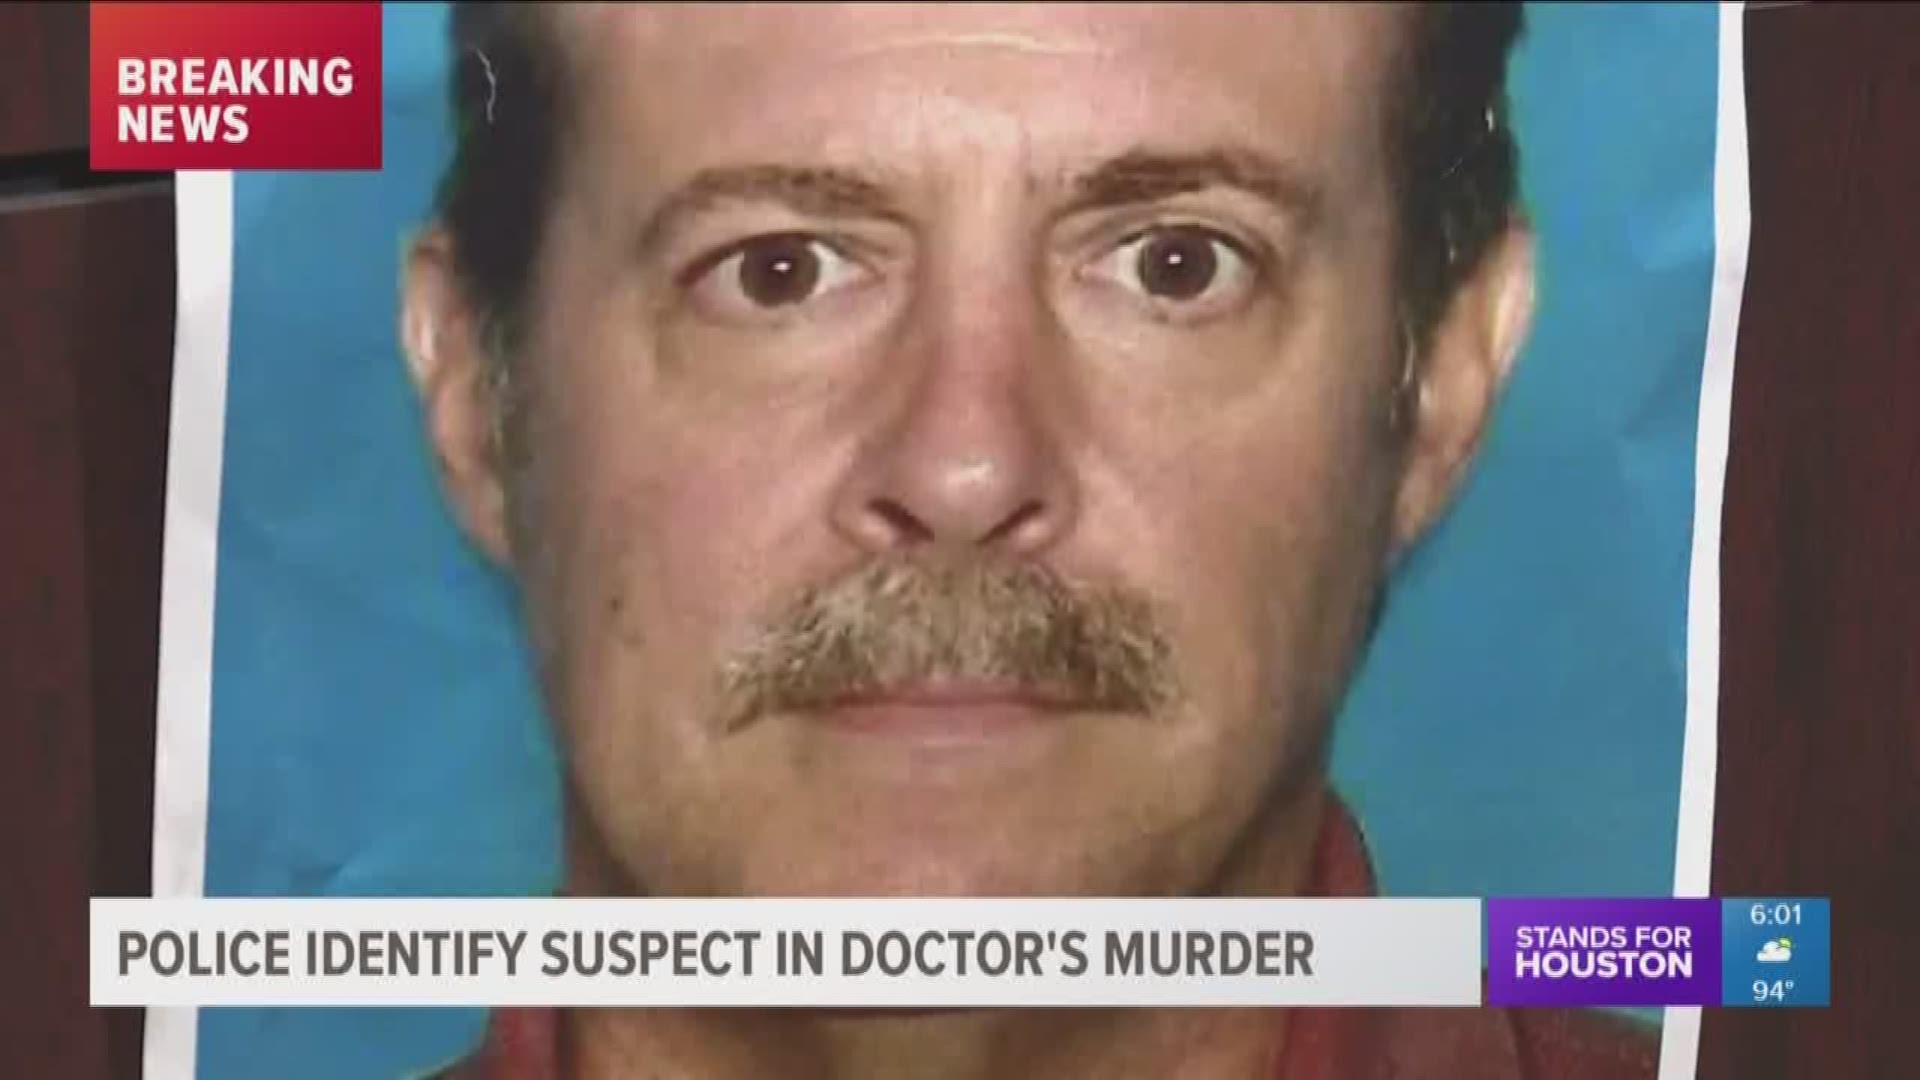 Houston police have named a suspect in the shocking murder of a prominent Houston cardiologist. Joseph James Pappas II, 62, is the son of a woman who was treated by the victim, Dr. Mark Hausknecht. She died during surgery more than two decades ago.
"So it